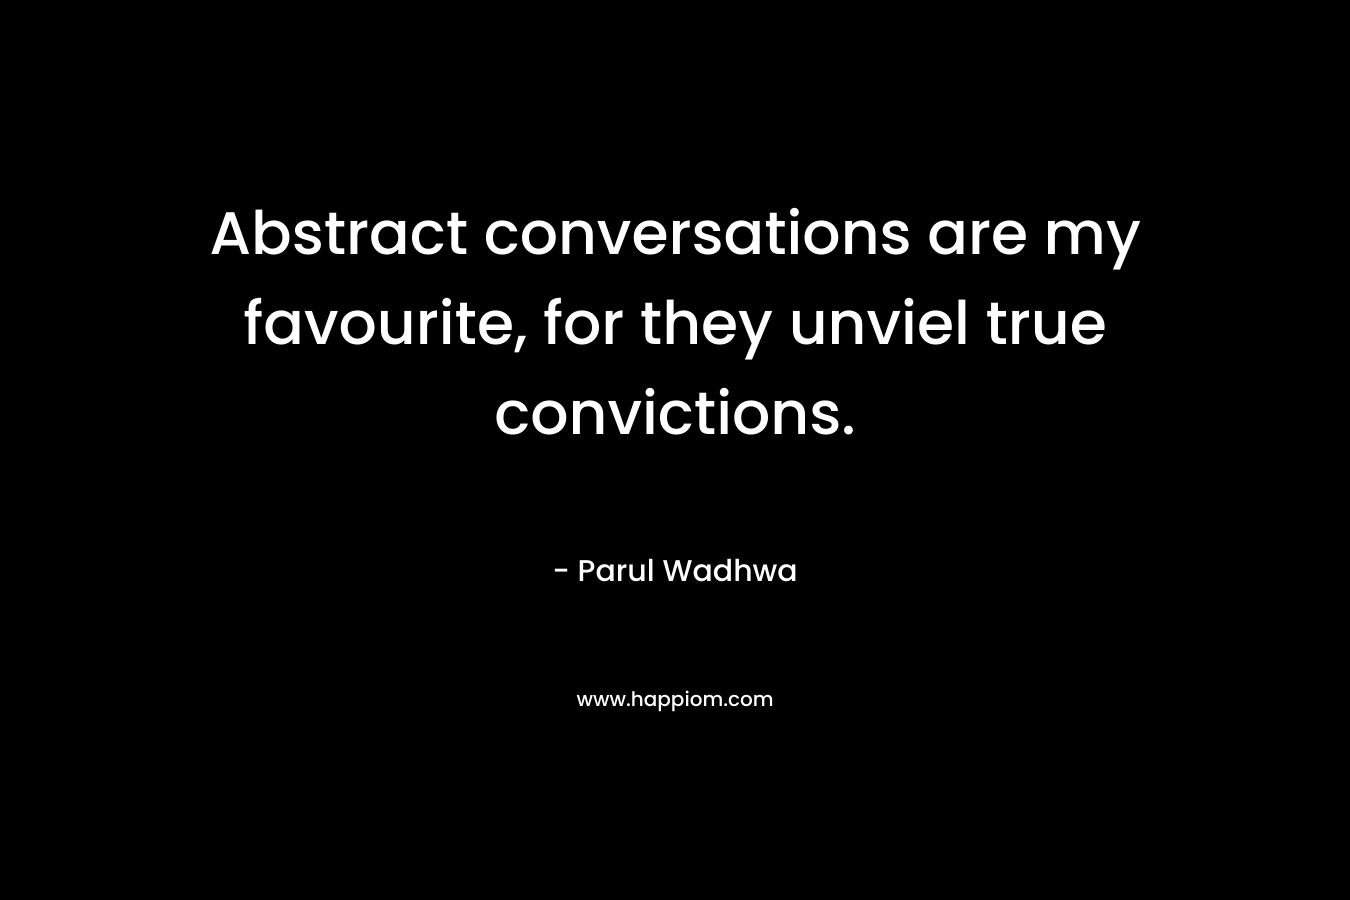 Abstract conversations are my favourite, for they unviel true convictions. – Parul Wadhwa